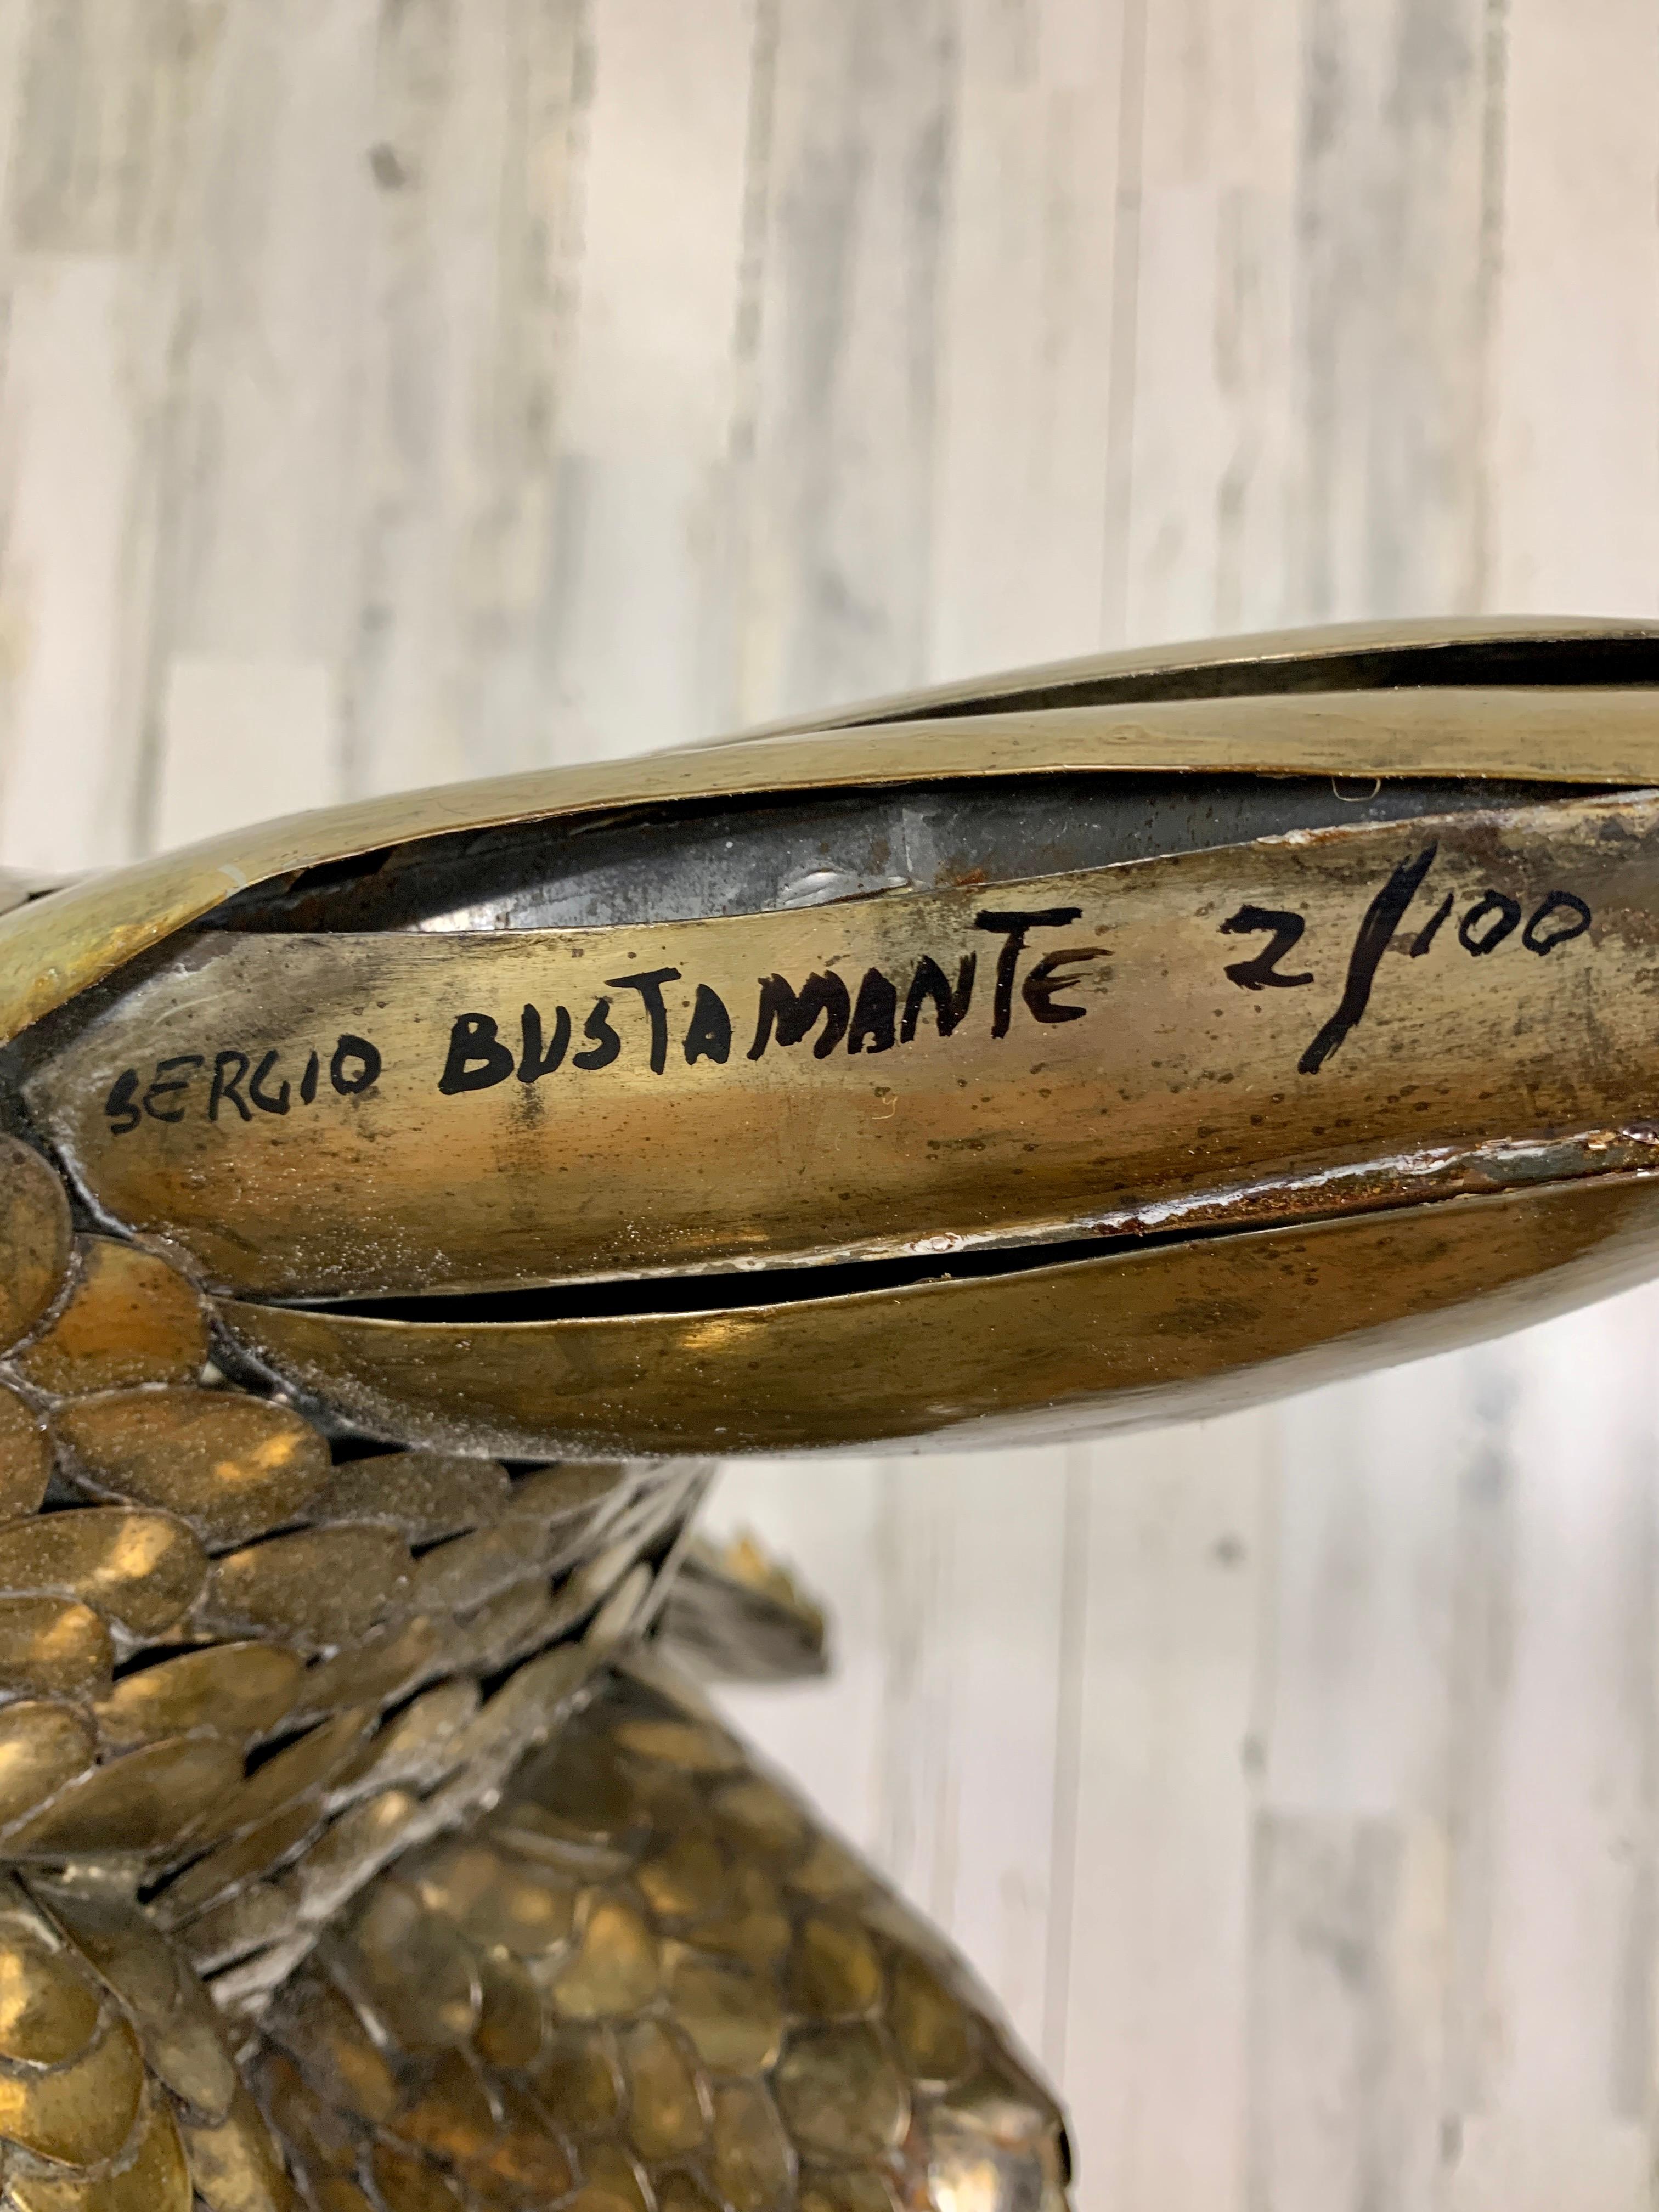 Limited Edition 2/100 Sergio Bustamante Flying Duck Sculpture 6